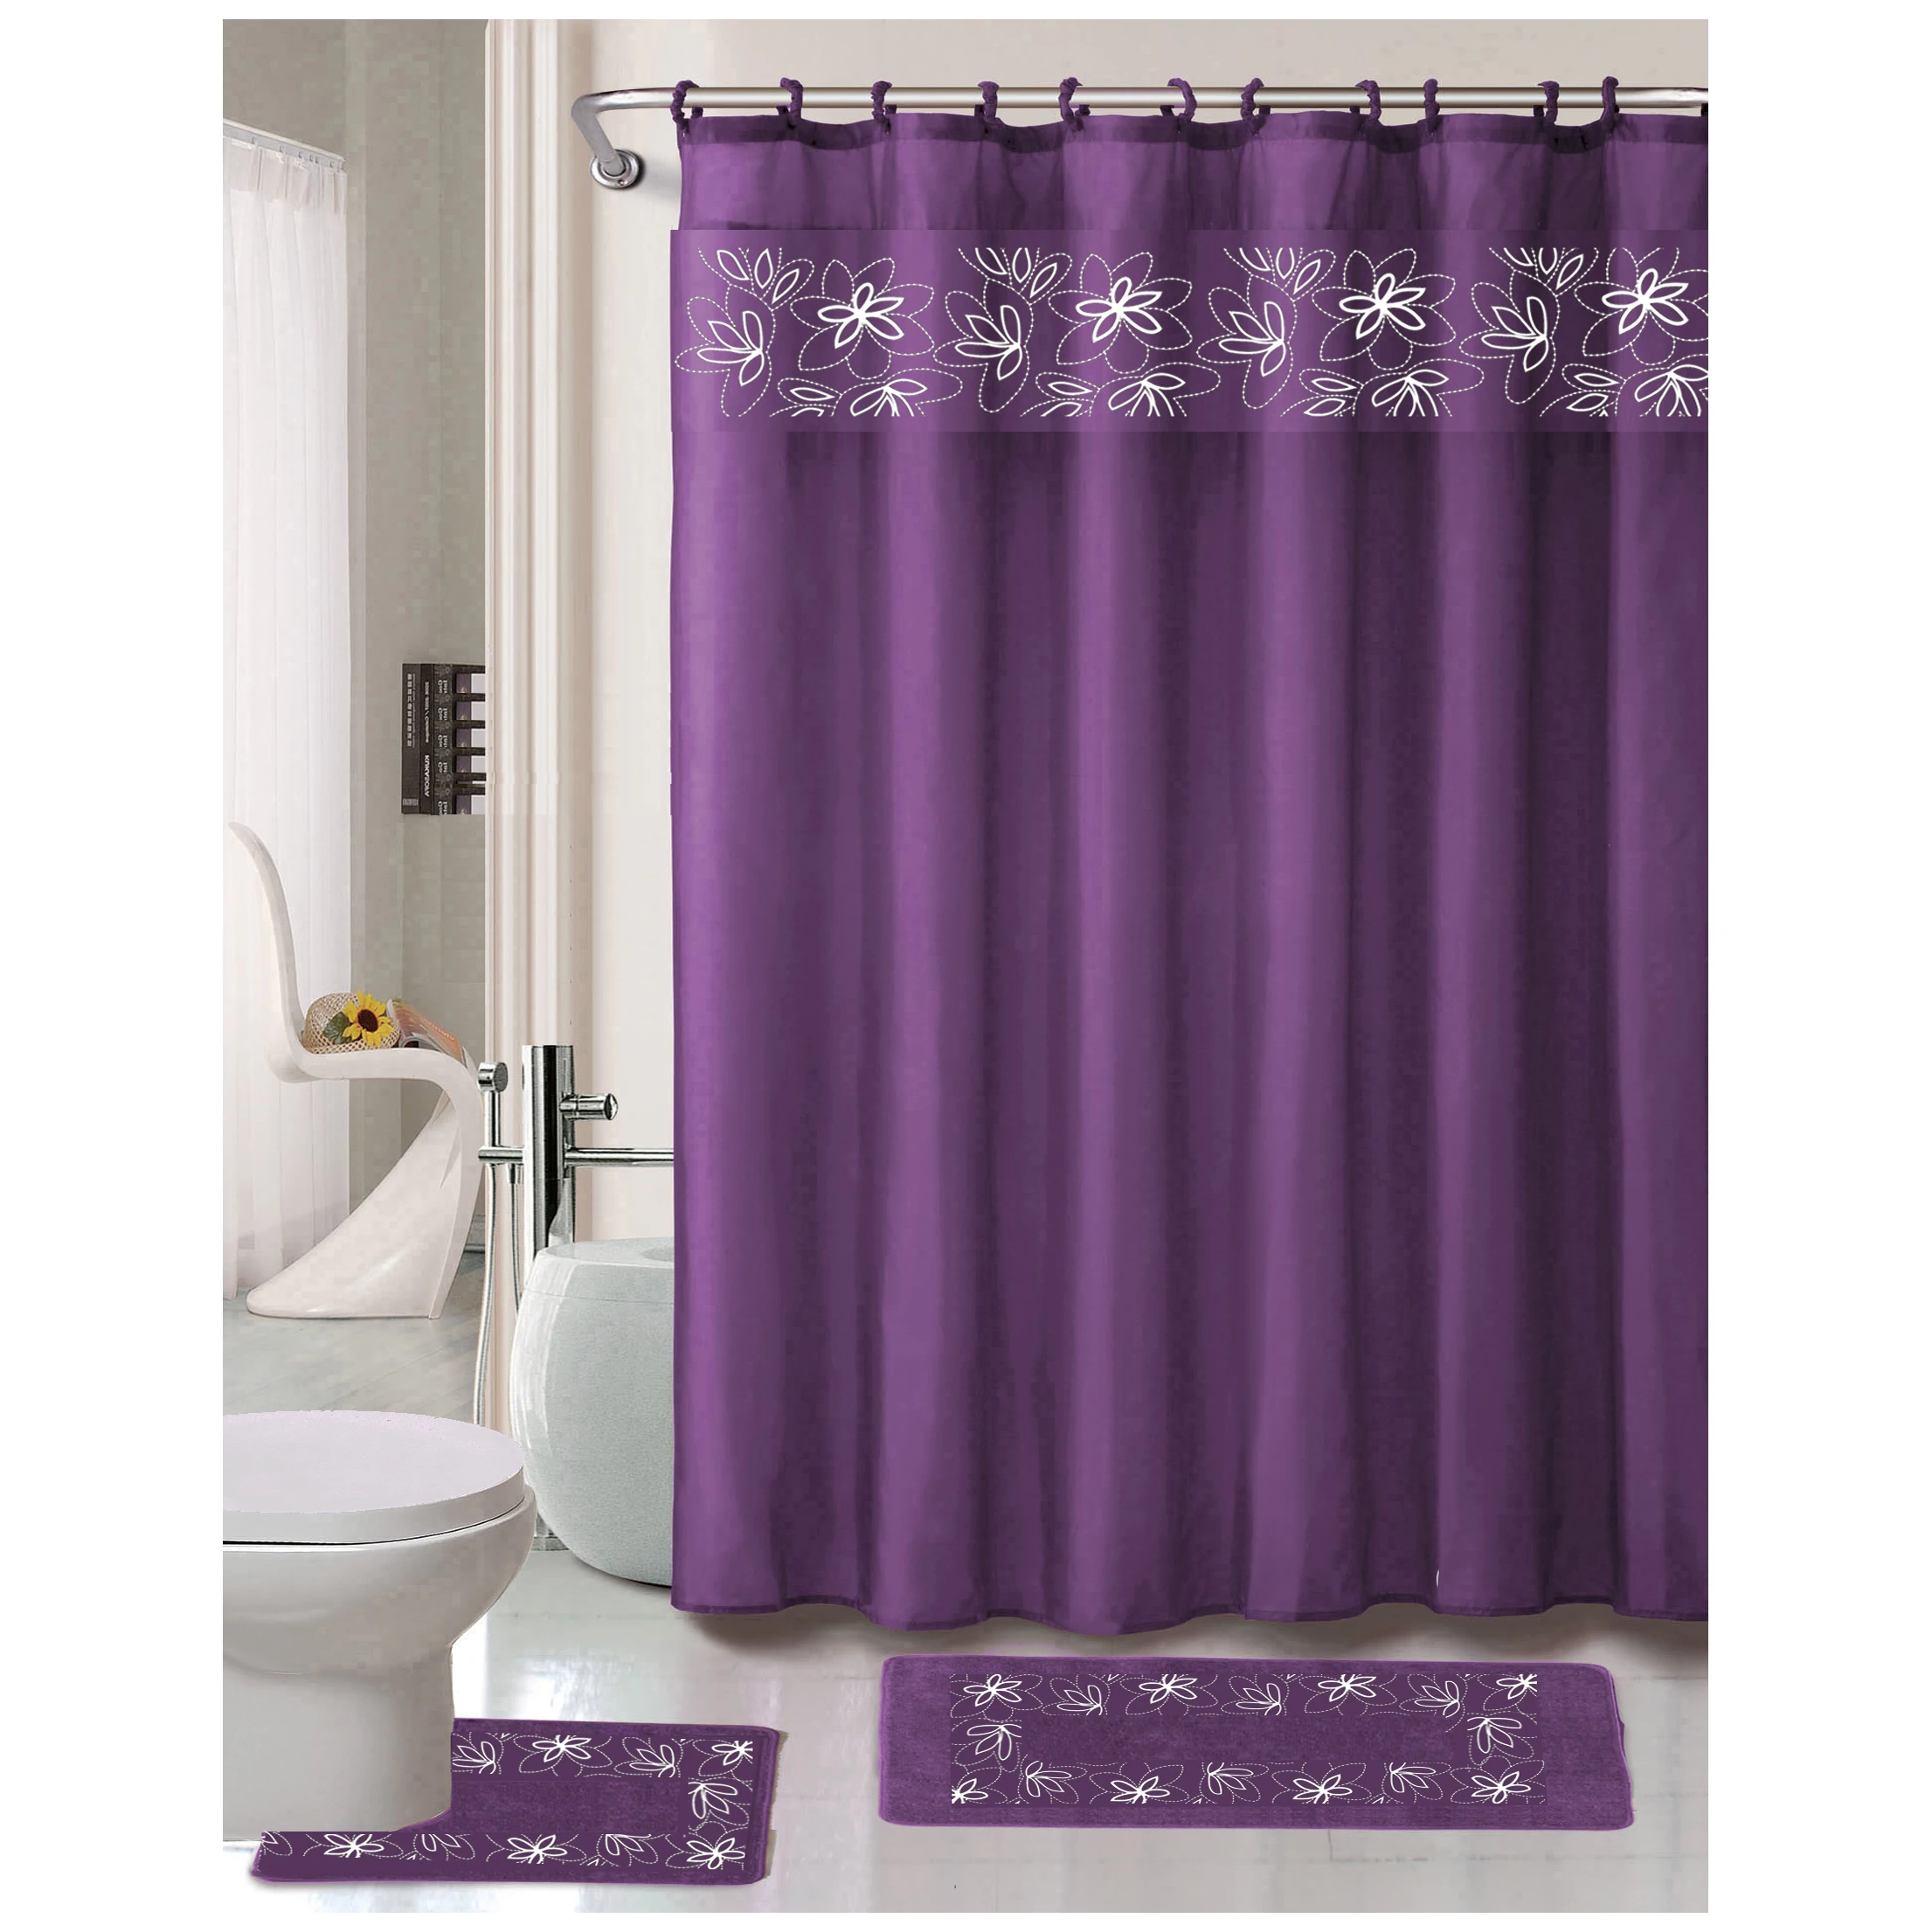 Details about   Bullfinch and Spring Plum Shower Curtain Toilet Cover Rug Mat Contour Rug Set 